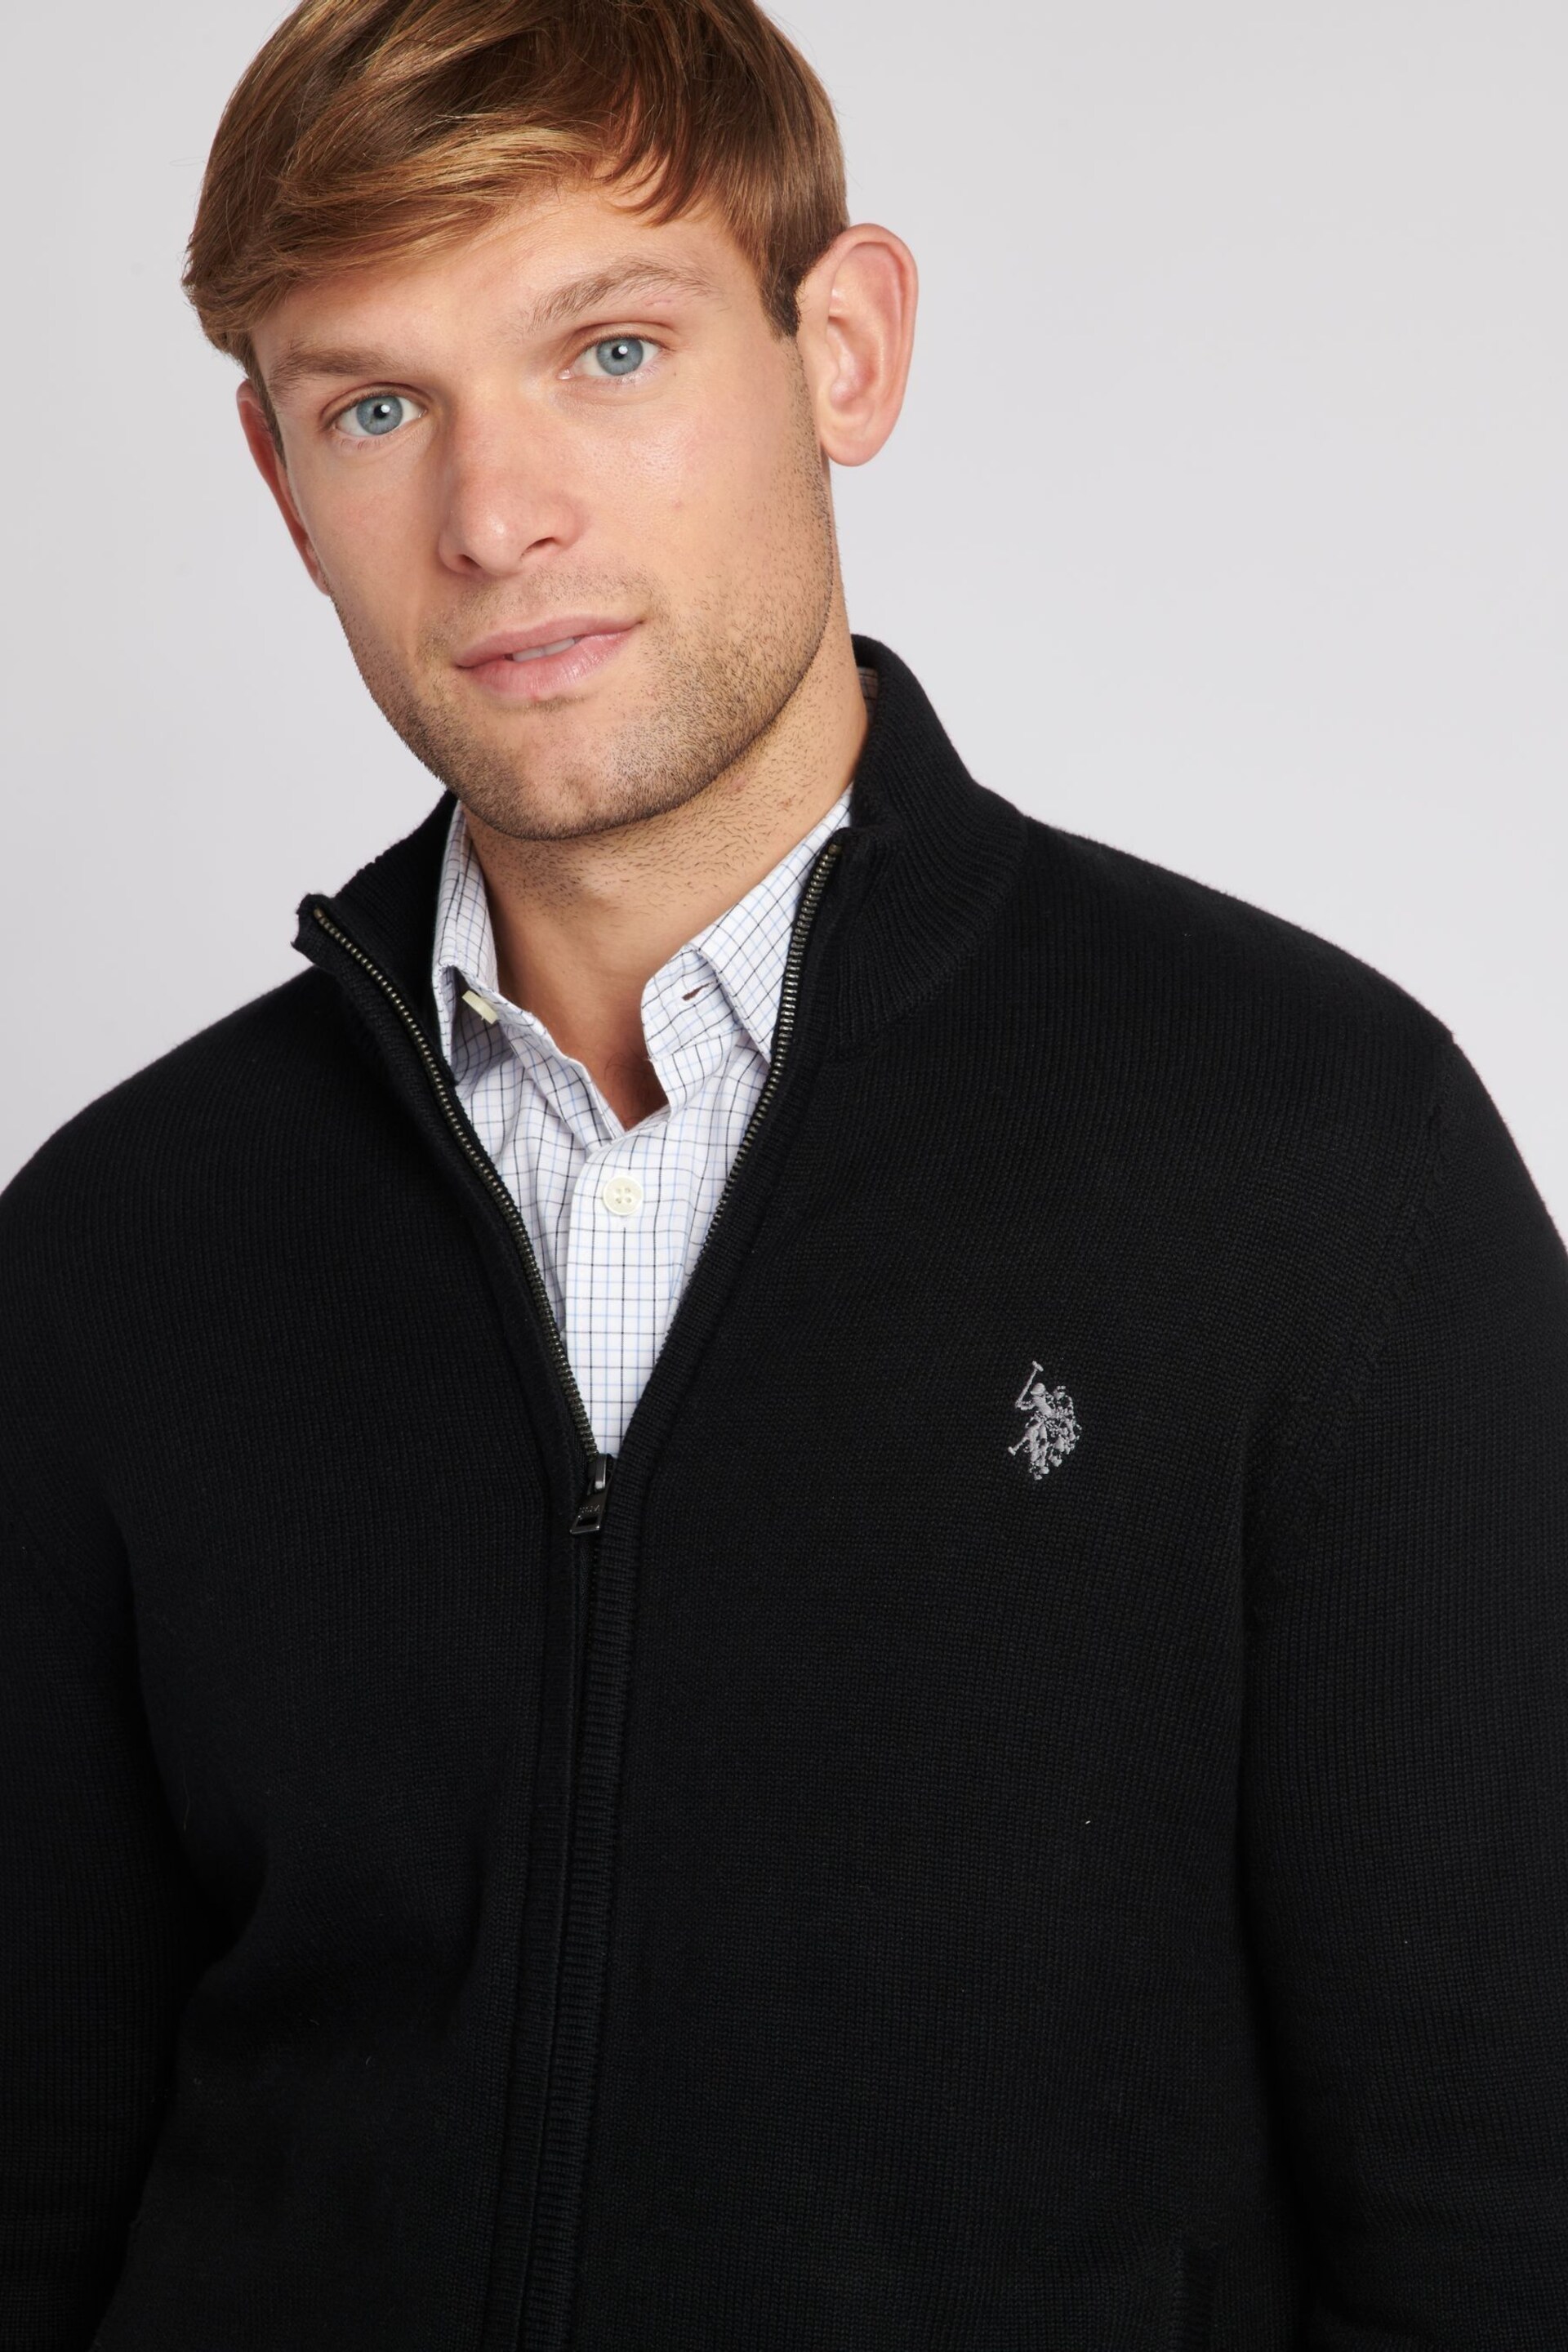 U.S. Polo Assn. Mens Knitted Black Cardigan - Image 2 of 8